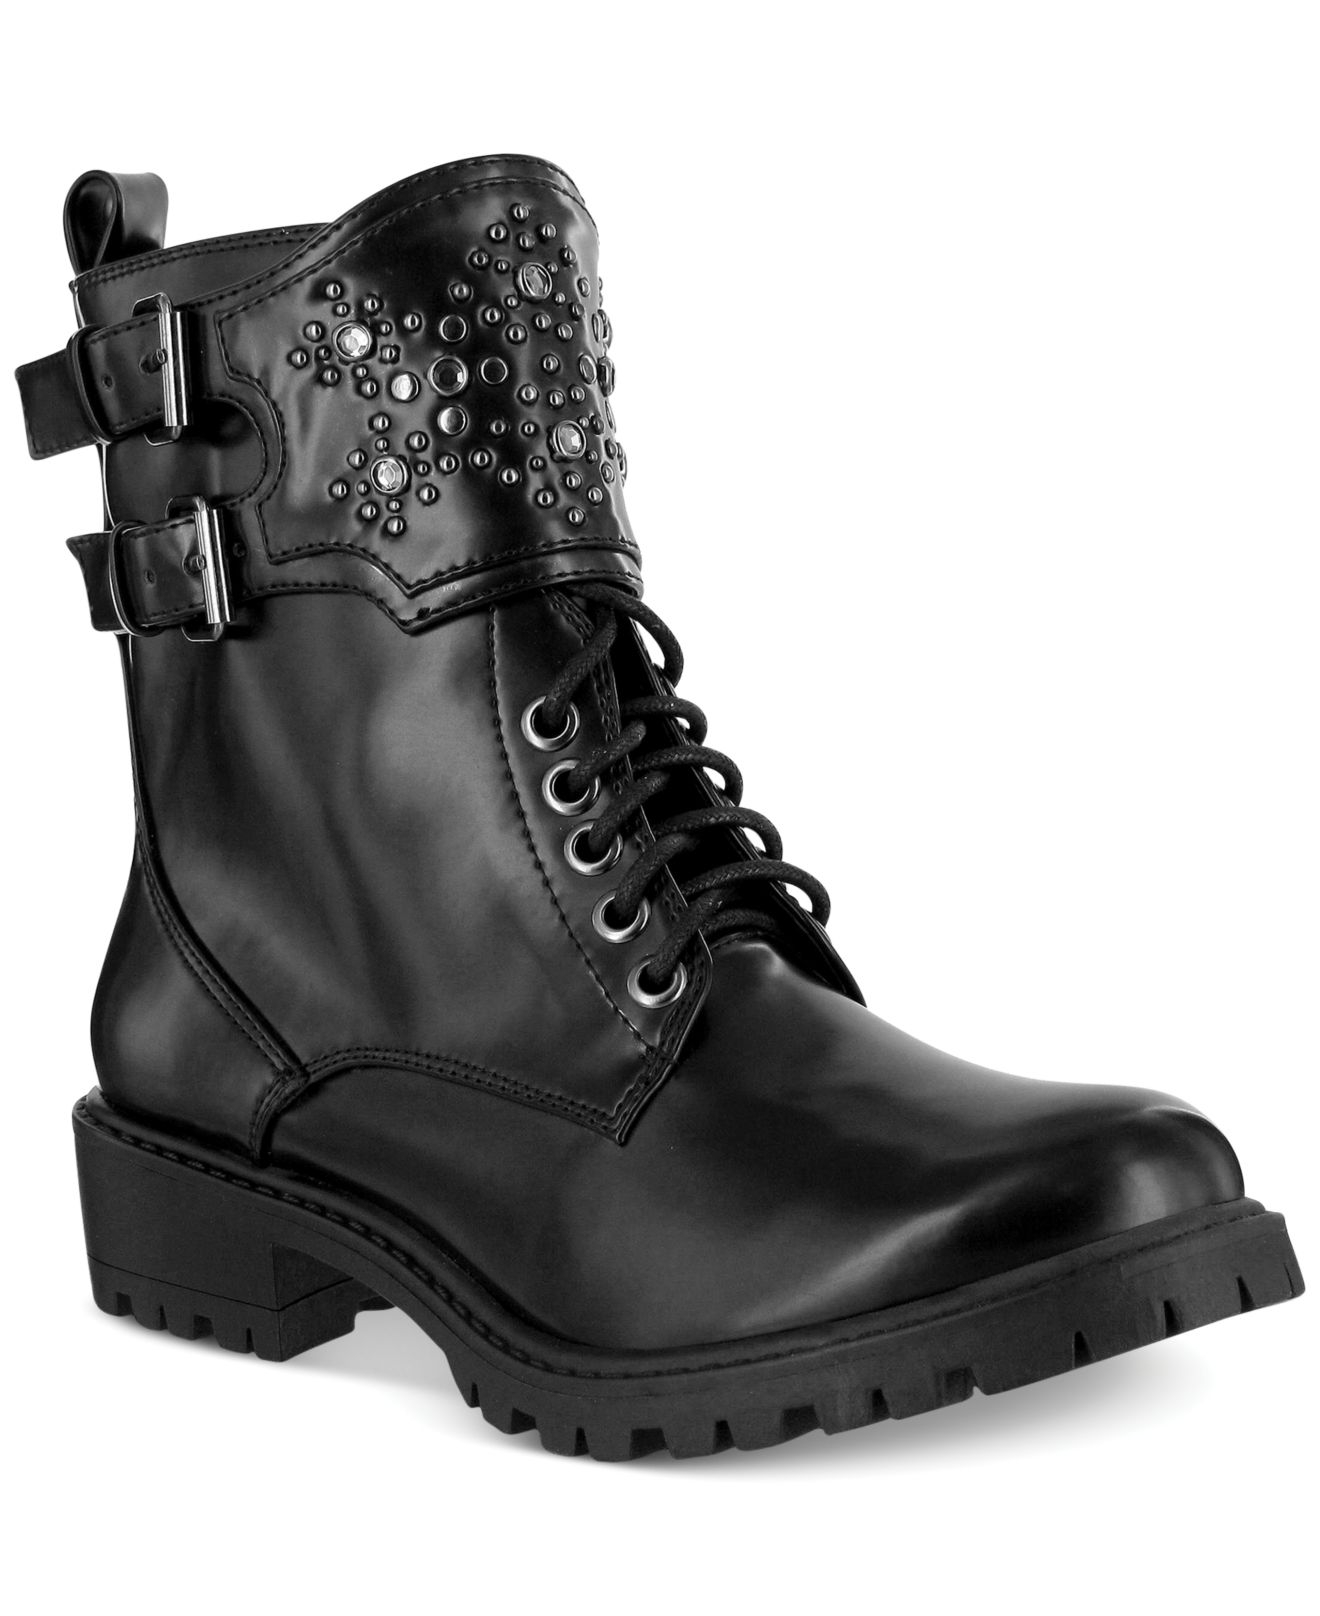 Lyst - Mia Perry Combat Boots in Black